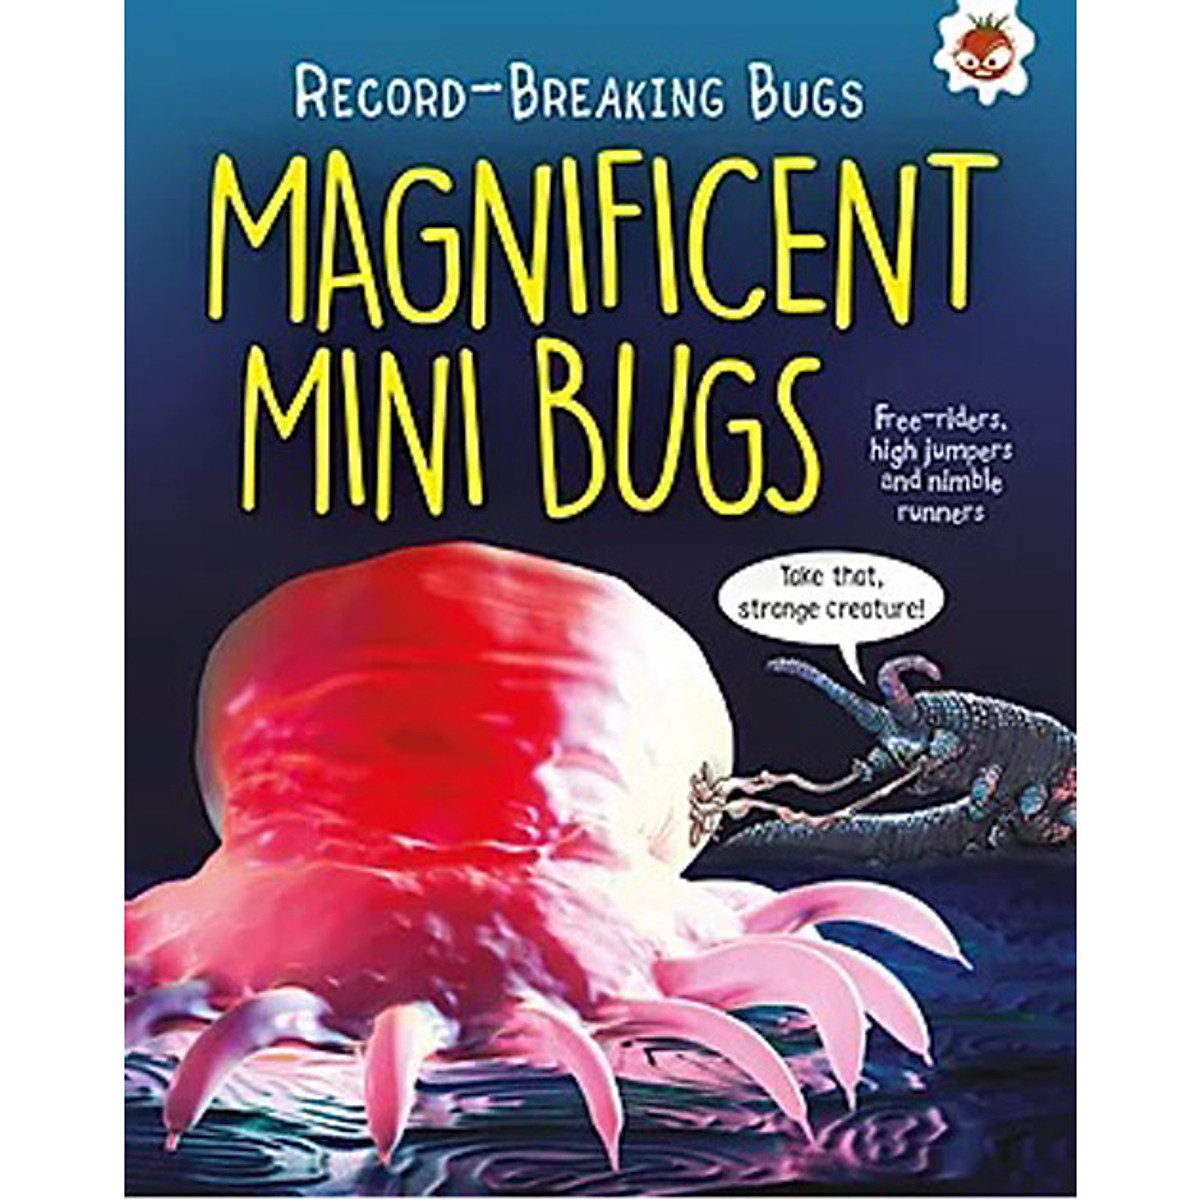 Sách tiếng Anh - Record Breaking Bugs : Magnificient Mini Bugs